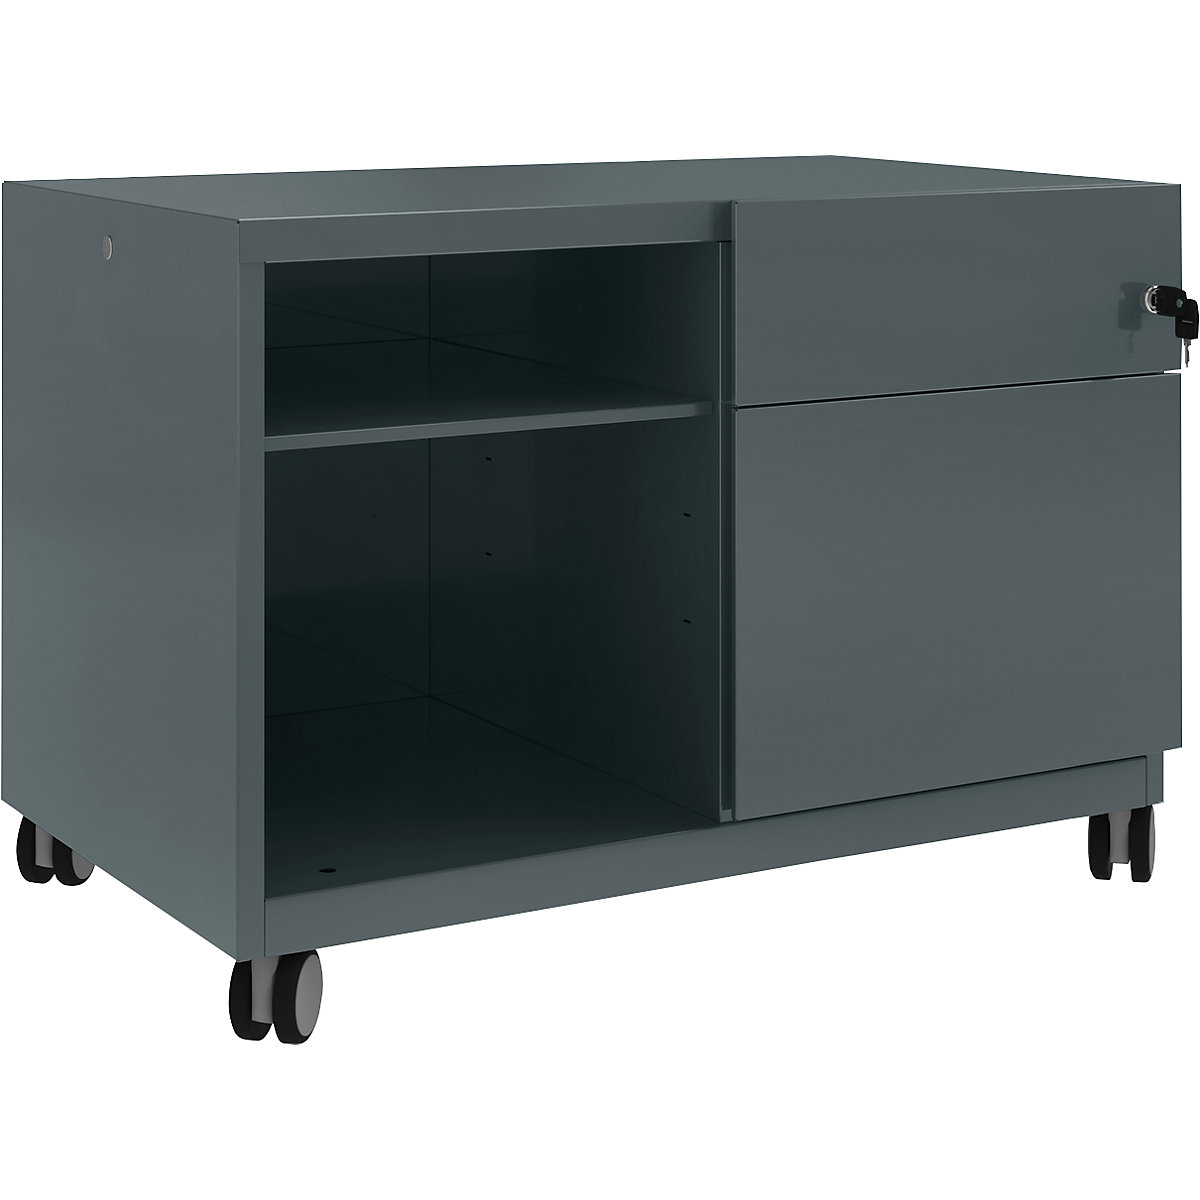 Note™ CADDY, HxBxT 563 x 800 x 490 mm – BISLEY, 1 universal drawer and suspension file drawer on the right, slate-8